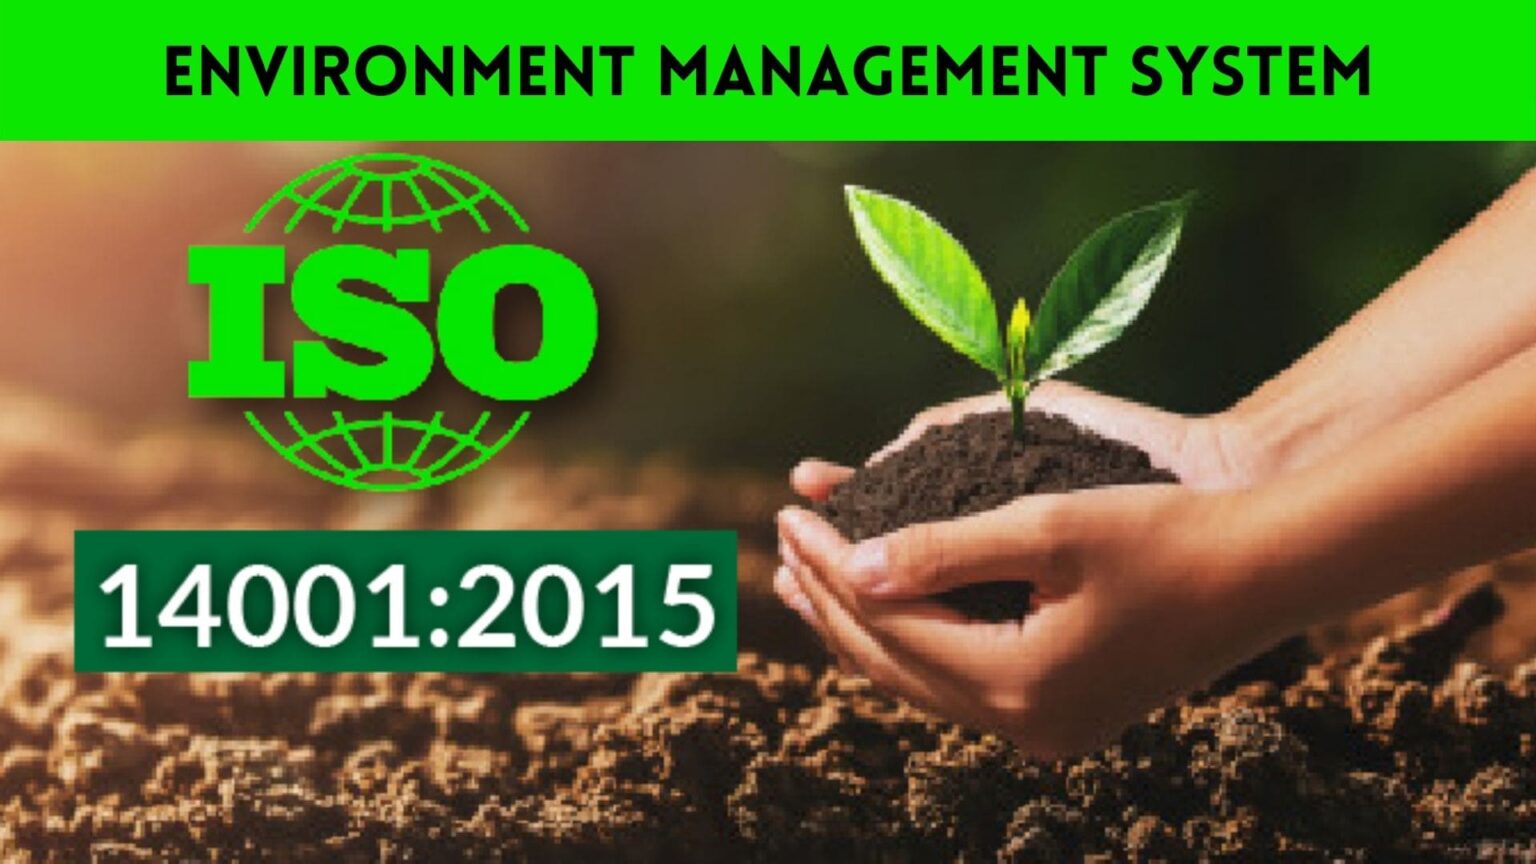 iso 14001 certification